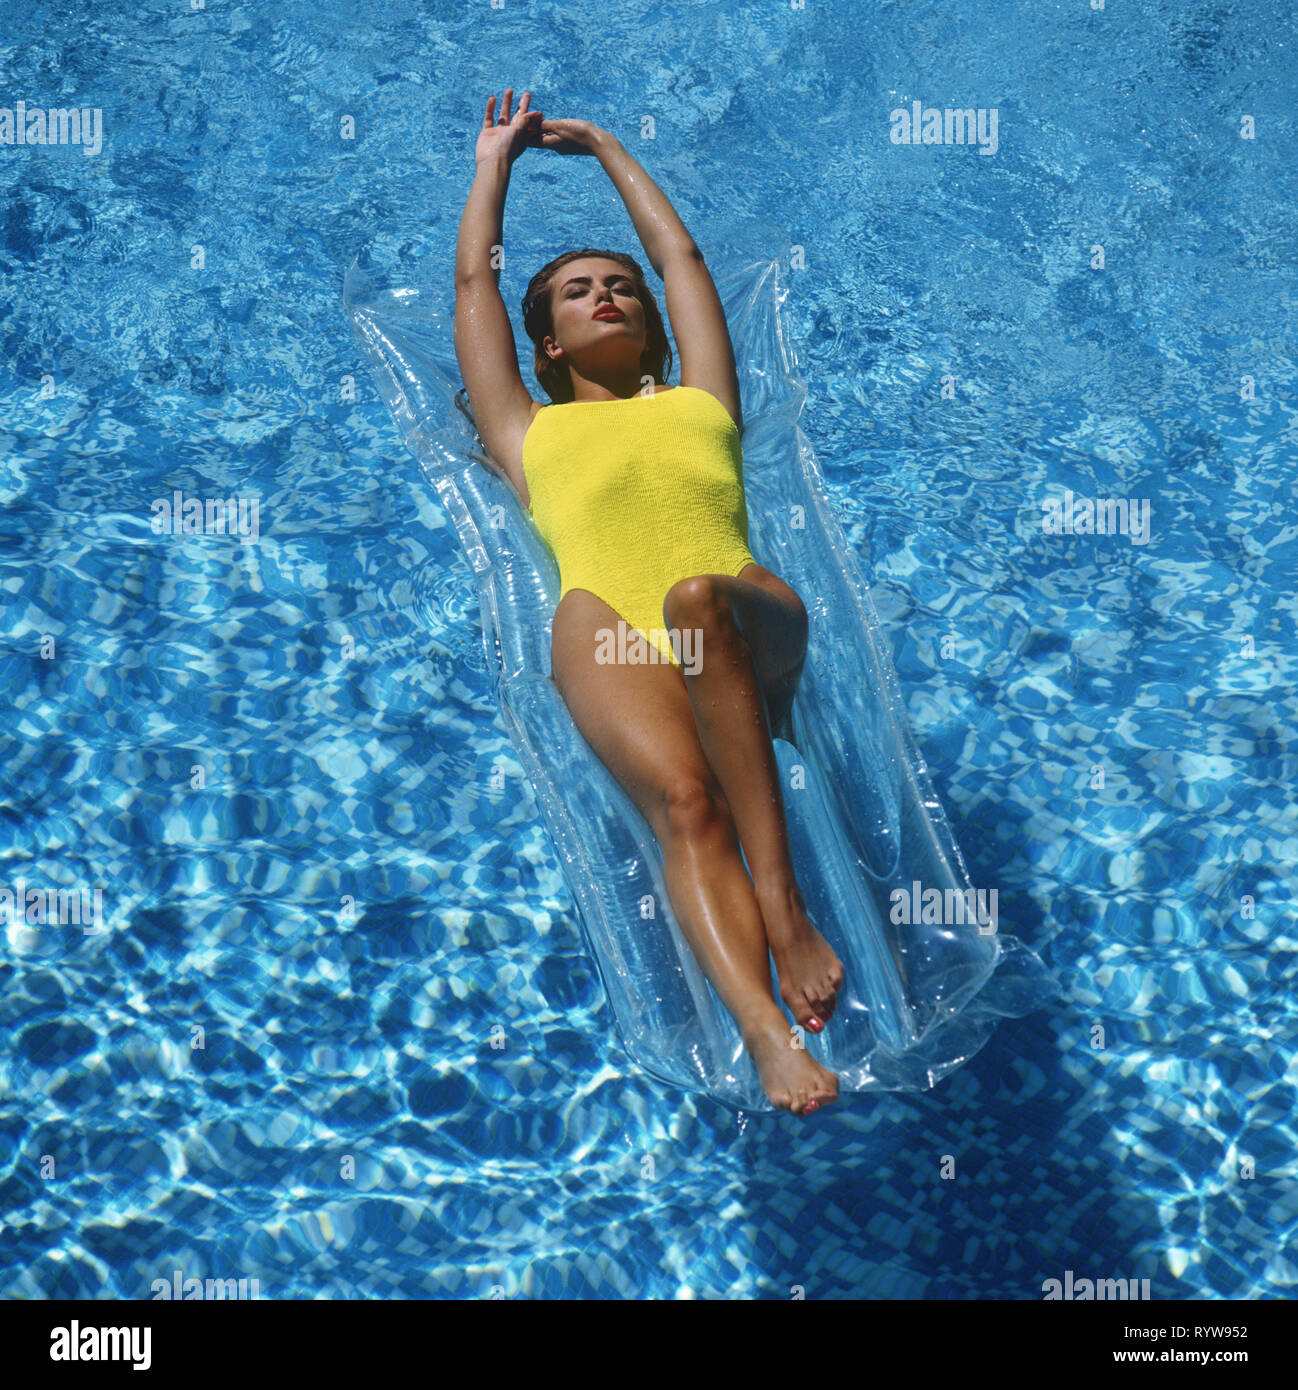 Kirsten Imrie, pin-up, in a pool, shot from above Stock Photo